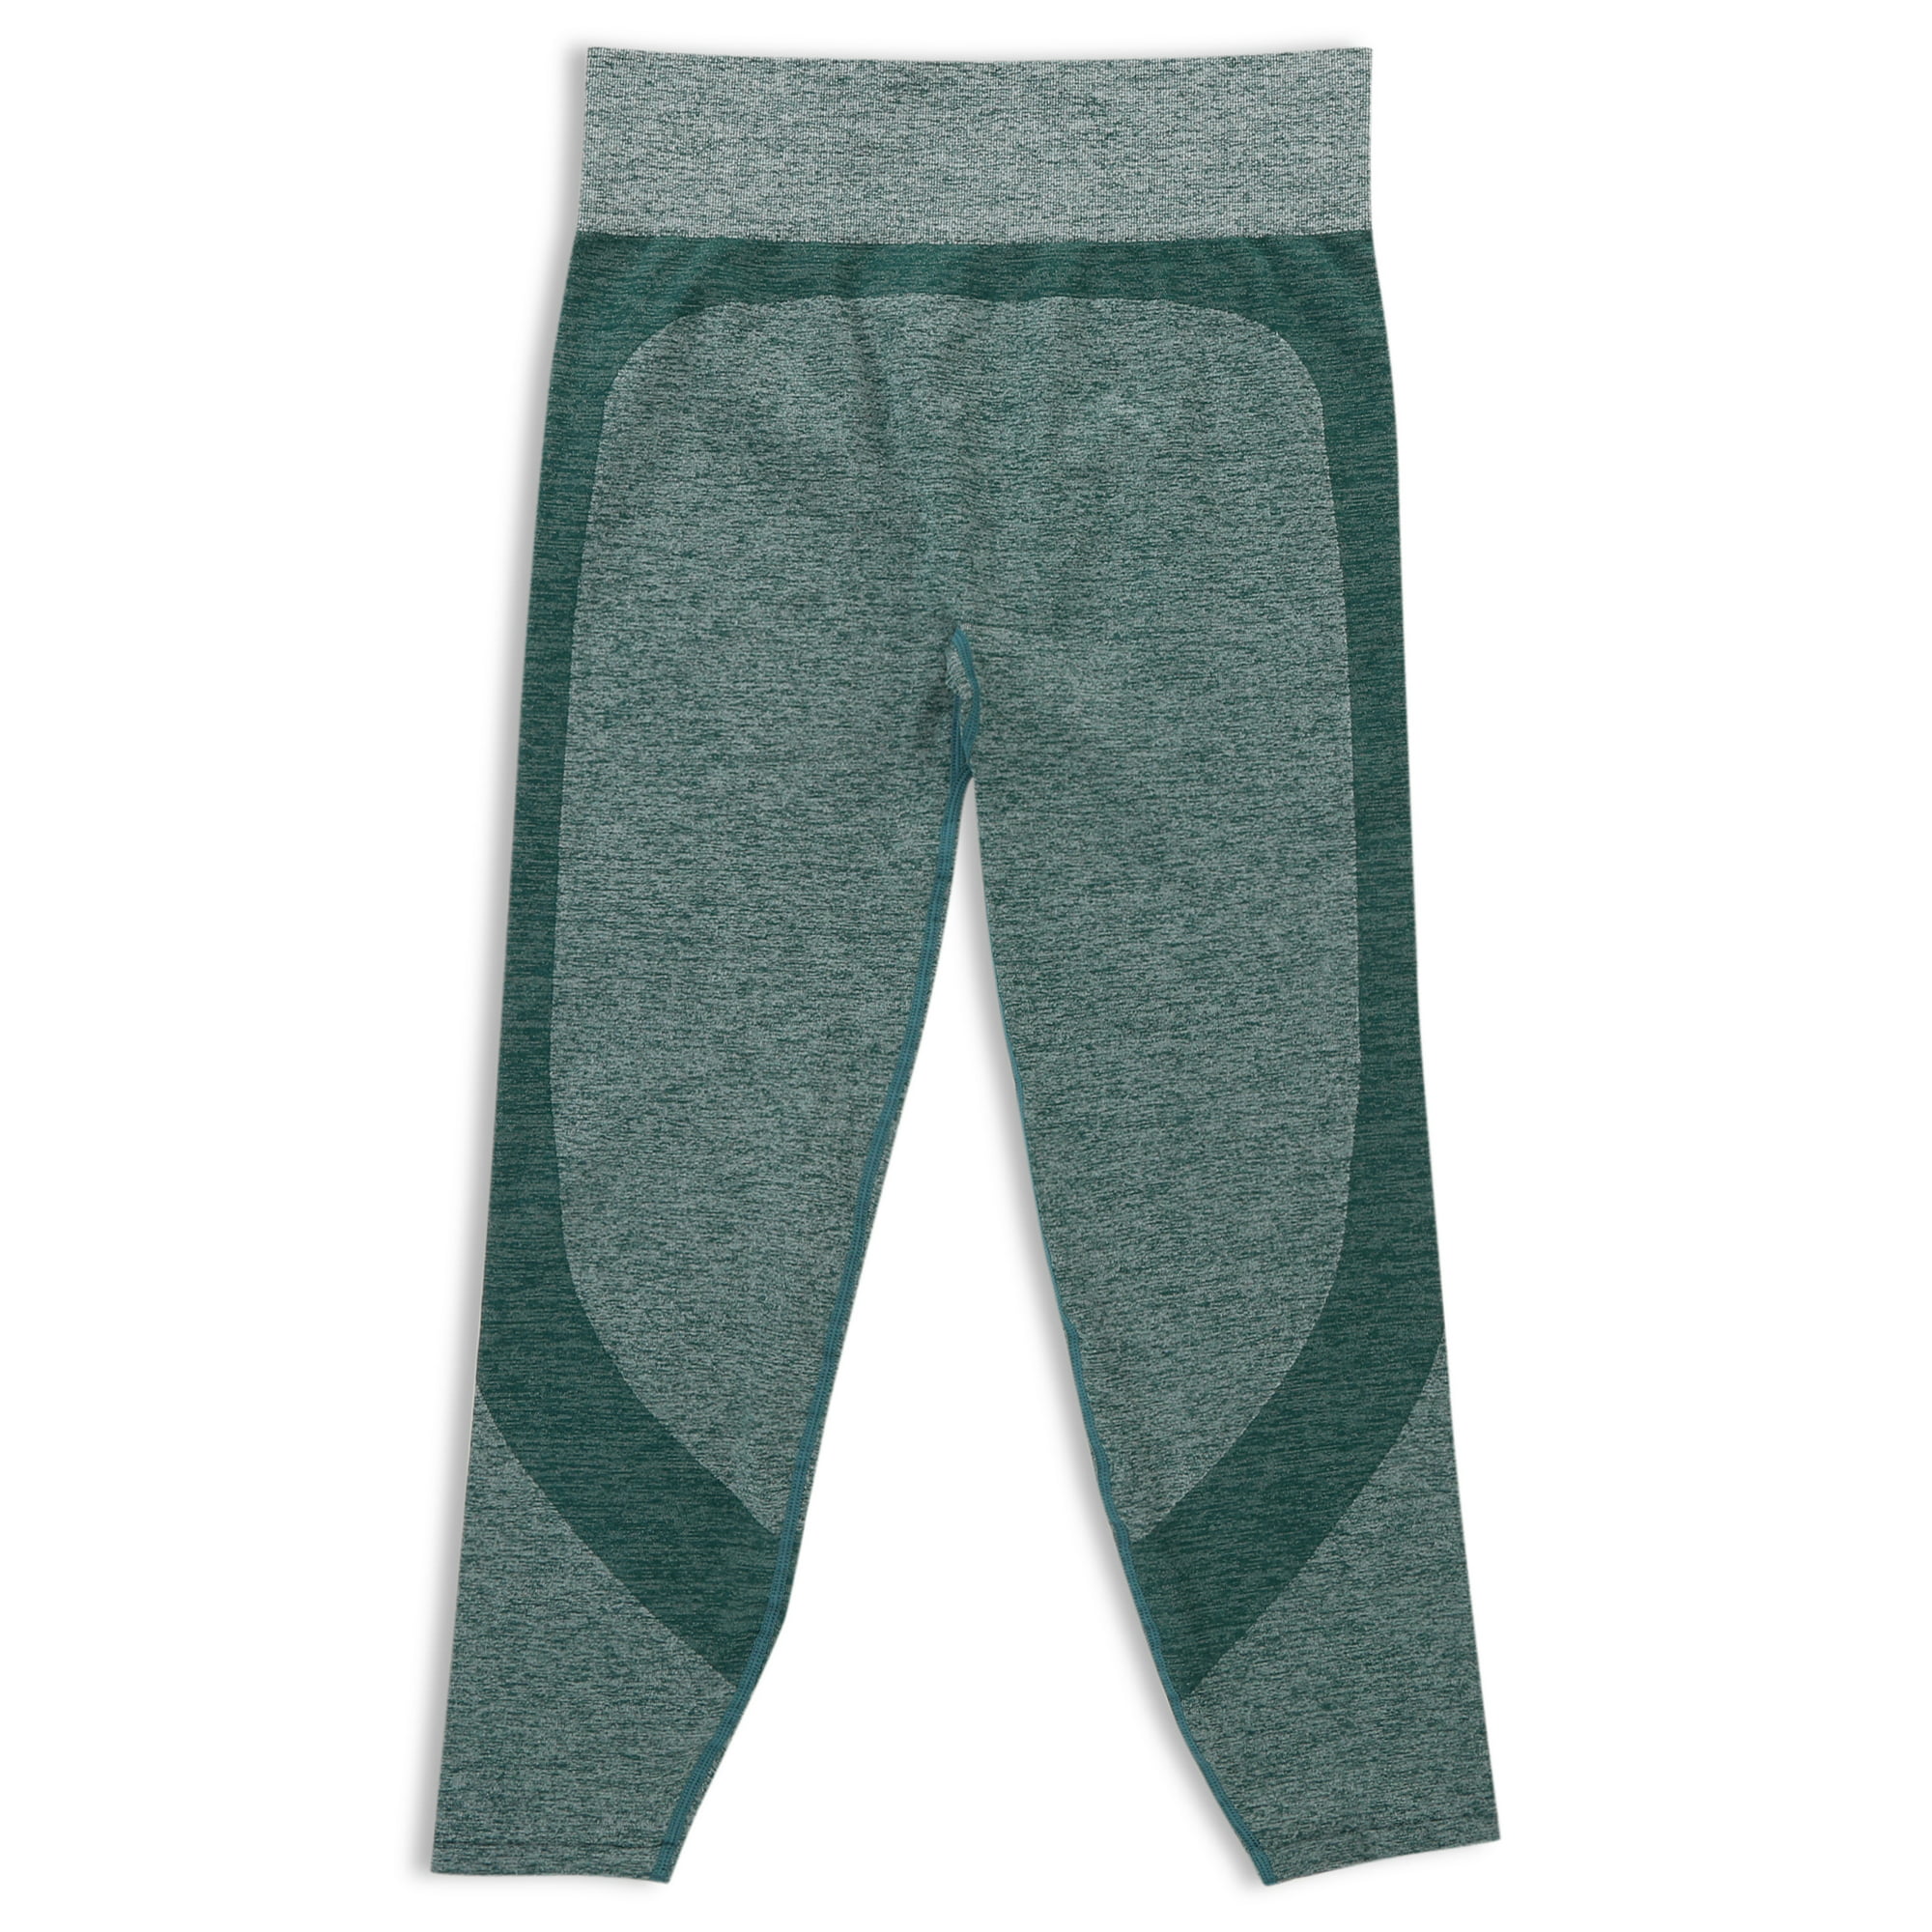 Avia Activewear Clearance as Low as $4 at Walmart - The Freebie Guy®